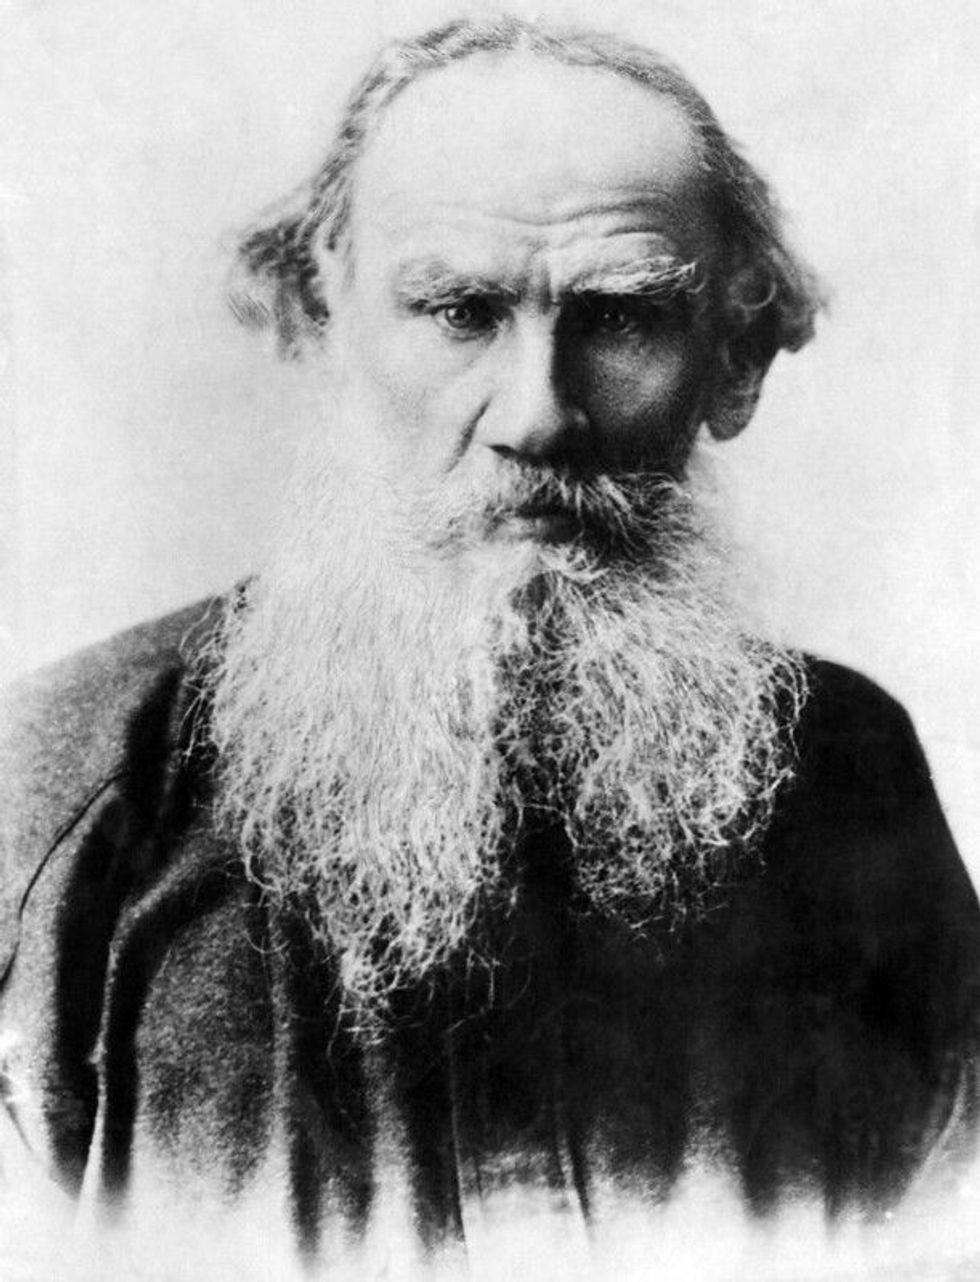 Leo Tolstoy (1828-1910), Russian writer, circa early 1900s.